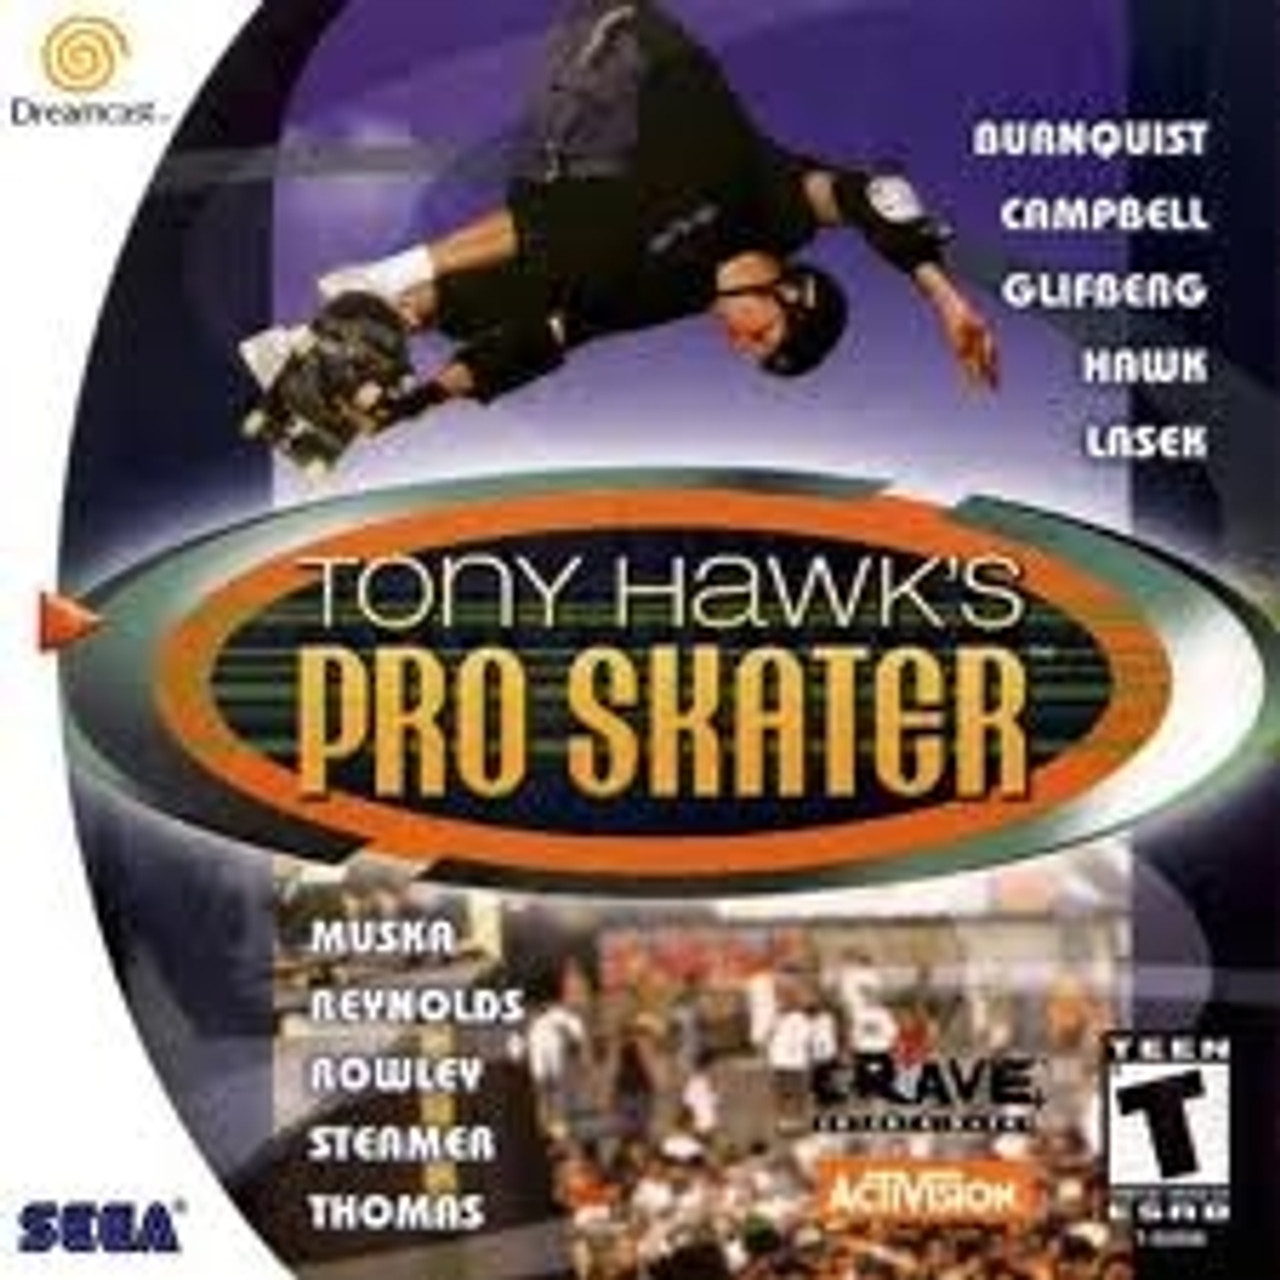 Tony Hawk's Pro Skater 3 Playstation 1 PS1 Game For Sale